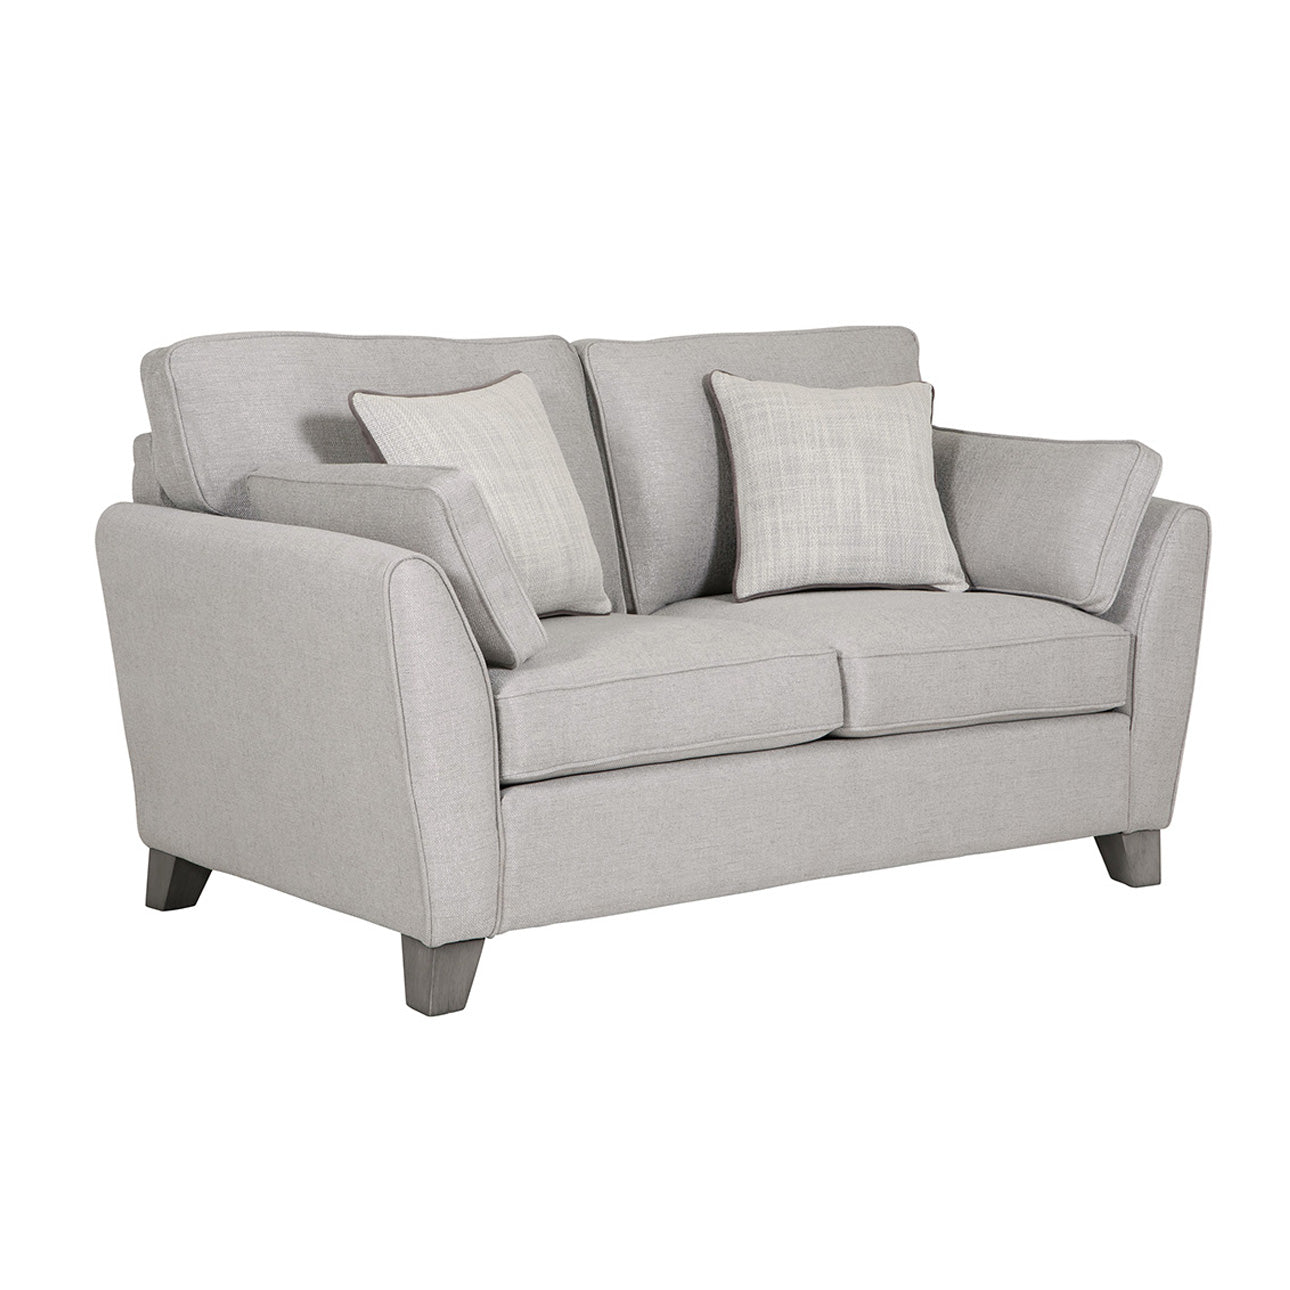 Cantrell 2 Seater - Light Grey